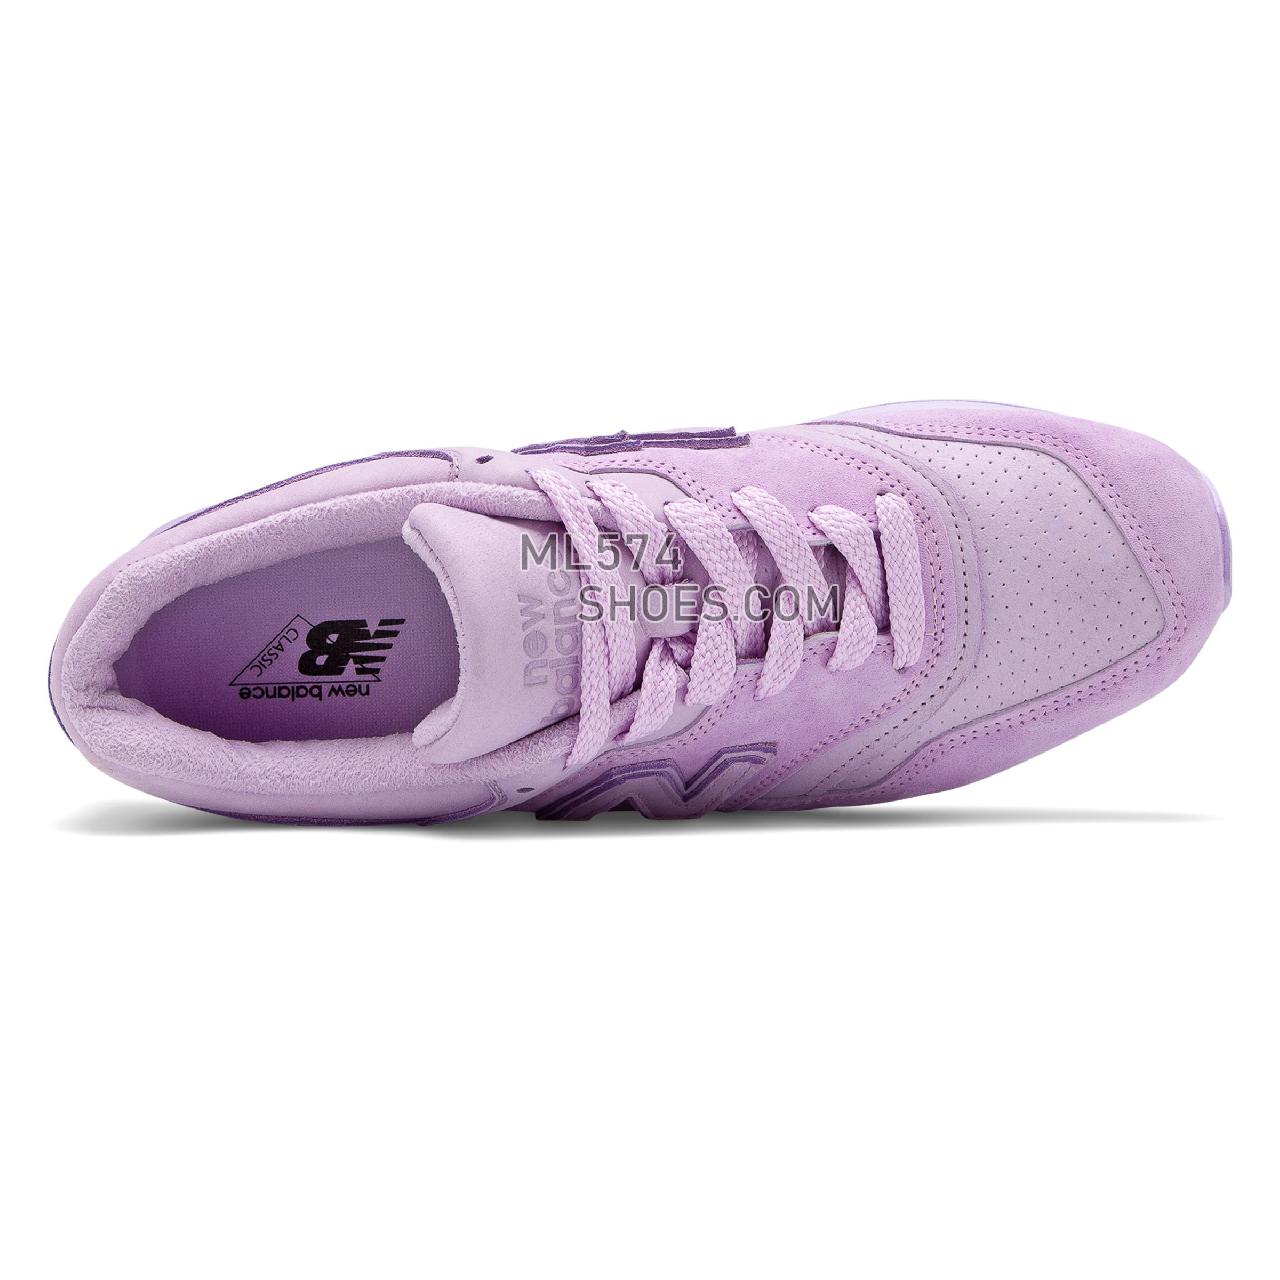 New Balance Made in US 997 - Men's Made in US 997 - Purple - M997LBF